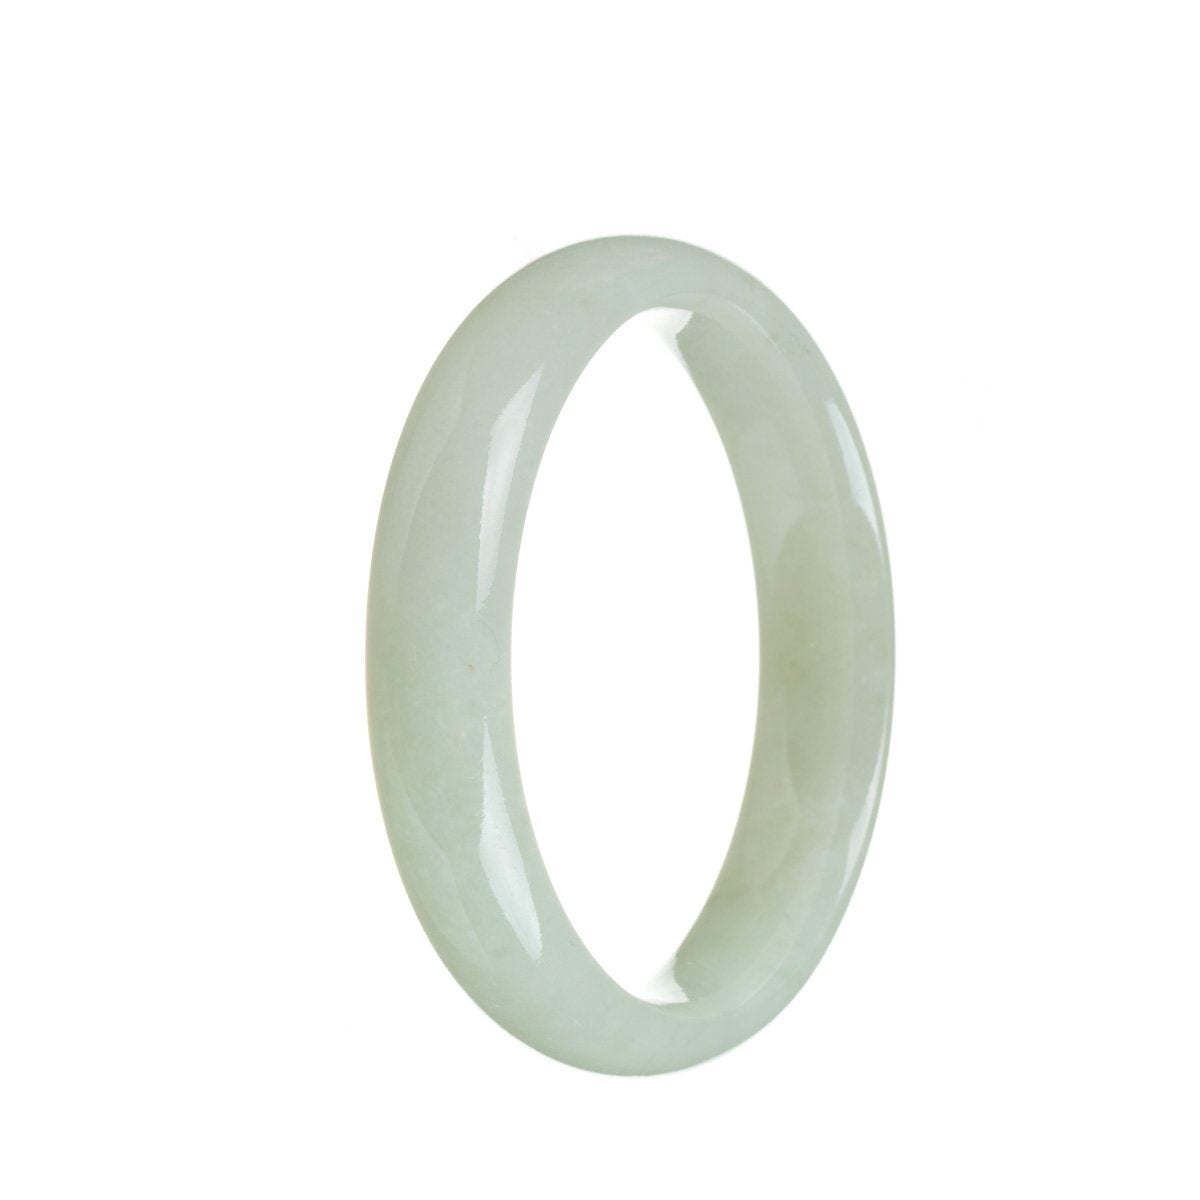 A close-up photo of a stunning jade bangle featuring a half moon shape. The bangle is made of high-quality, Grade A white Burmese jade, known for its exquisite beauty. The smooth, polished surface of the bangle reflects light, showcasing the natural variations and unique patterns of the jade. This luxurious piece of jewelry, measuring 56mm in diameter, is a testament to the skill and craftsmanship of MAYS™.